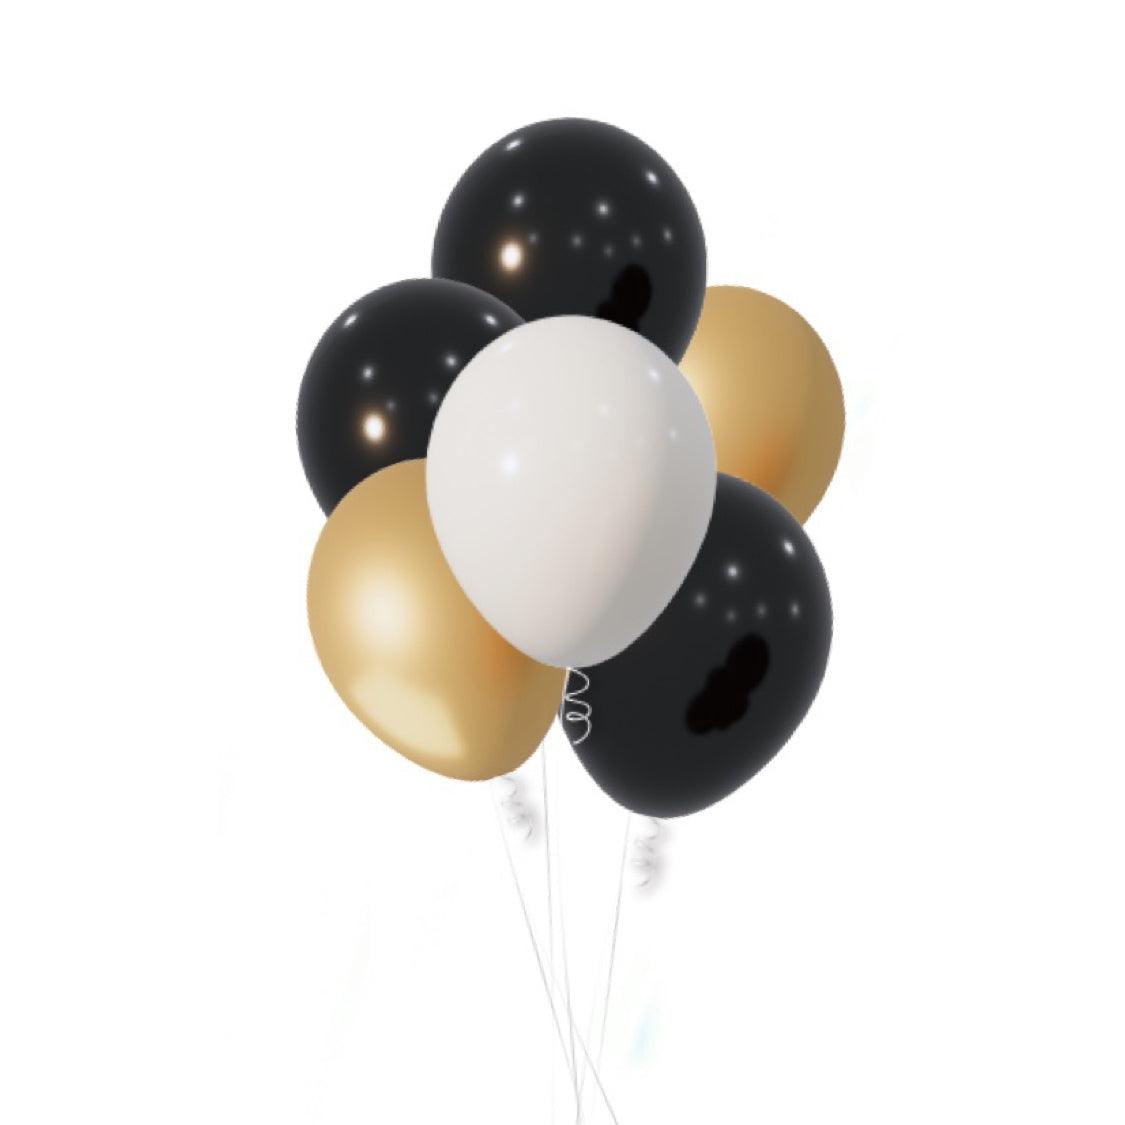 Classic Palette bouquet of 7 - ONE UP BALLOONS